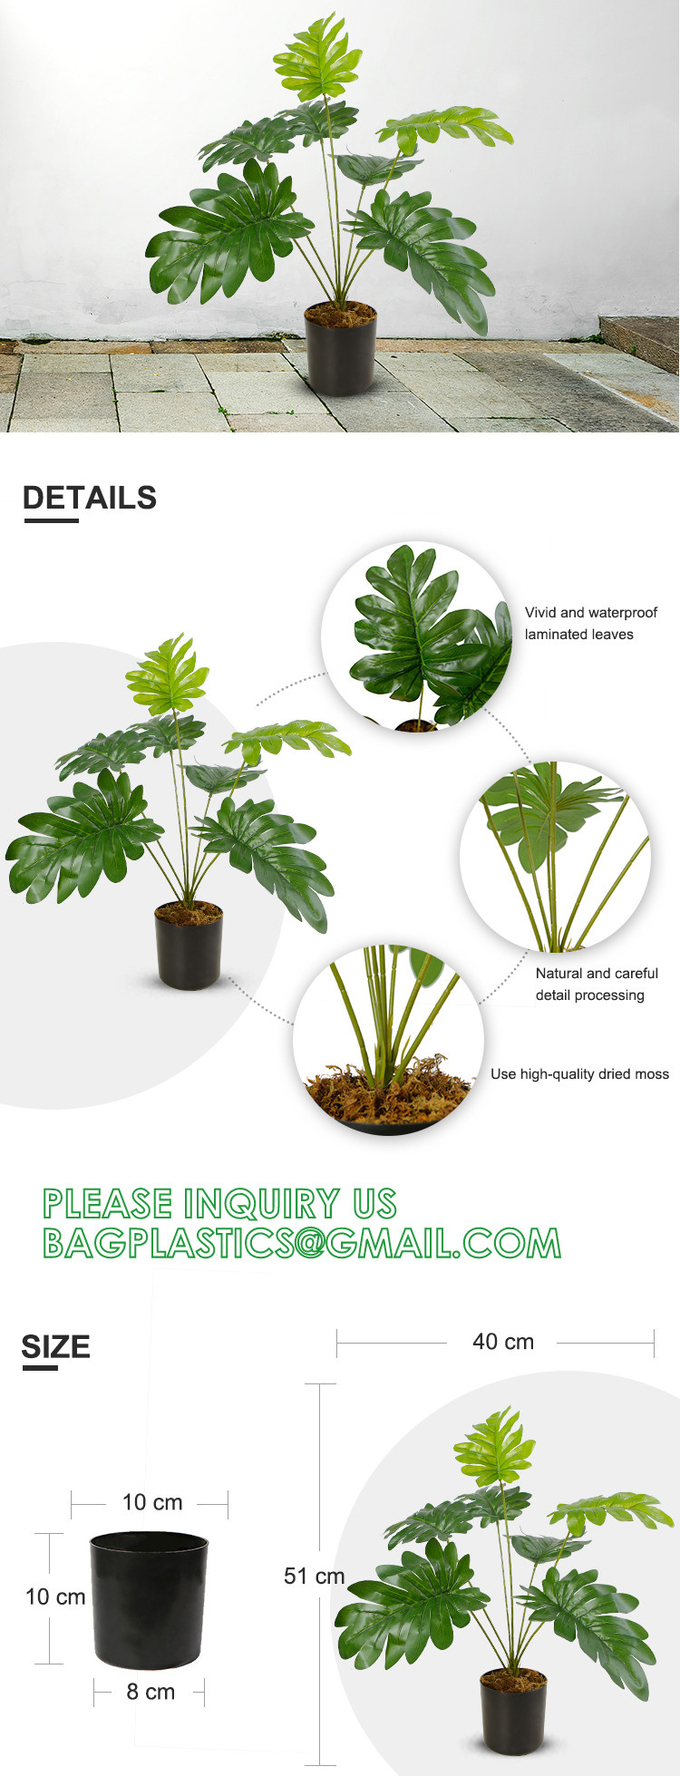 Fake Plants 16" Faux Plants Artificial Potted Plants Indoor for Home Office Farmhouse Kitchen Bathroom Table Shelf 18